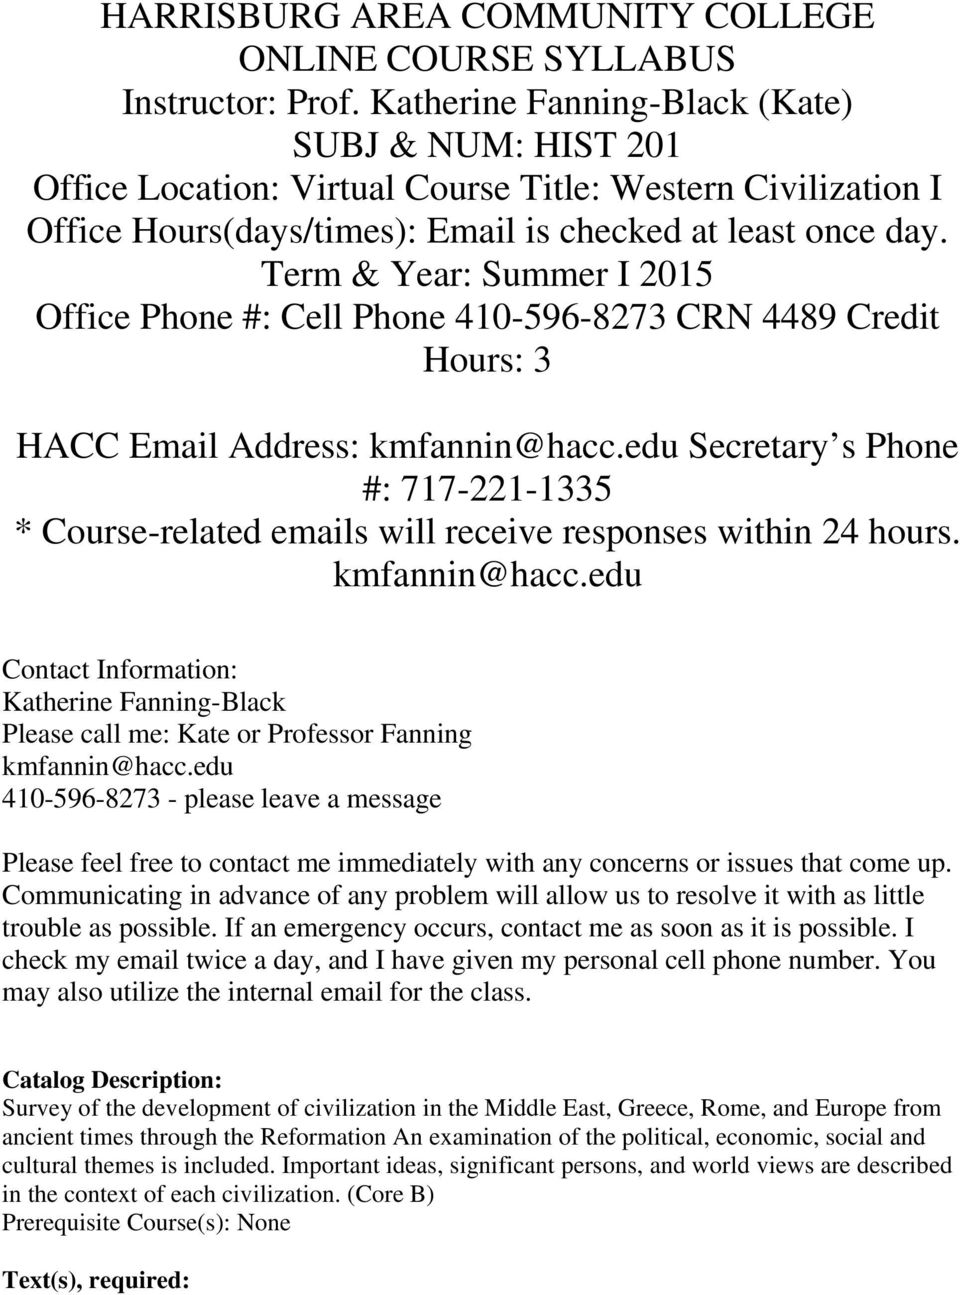 Term & Year: Summer I 2015 Office Phone #: Cell Phone 410-596-8273 CRN 4489 Credit Hours: 3 HACC Email Address: kmfannin@hacc.